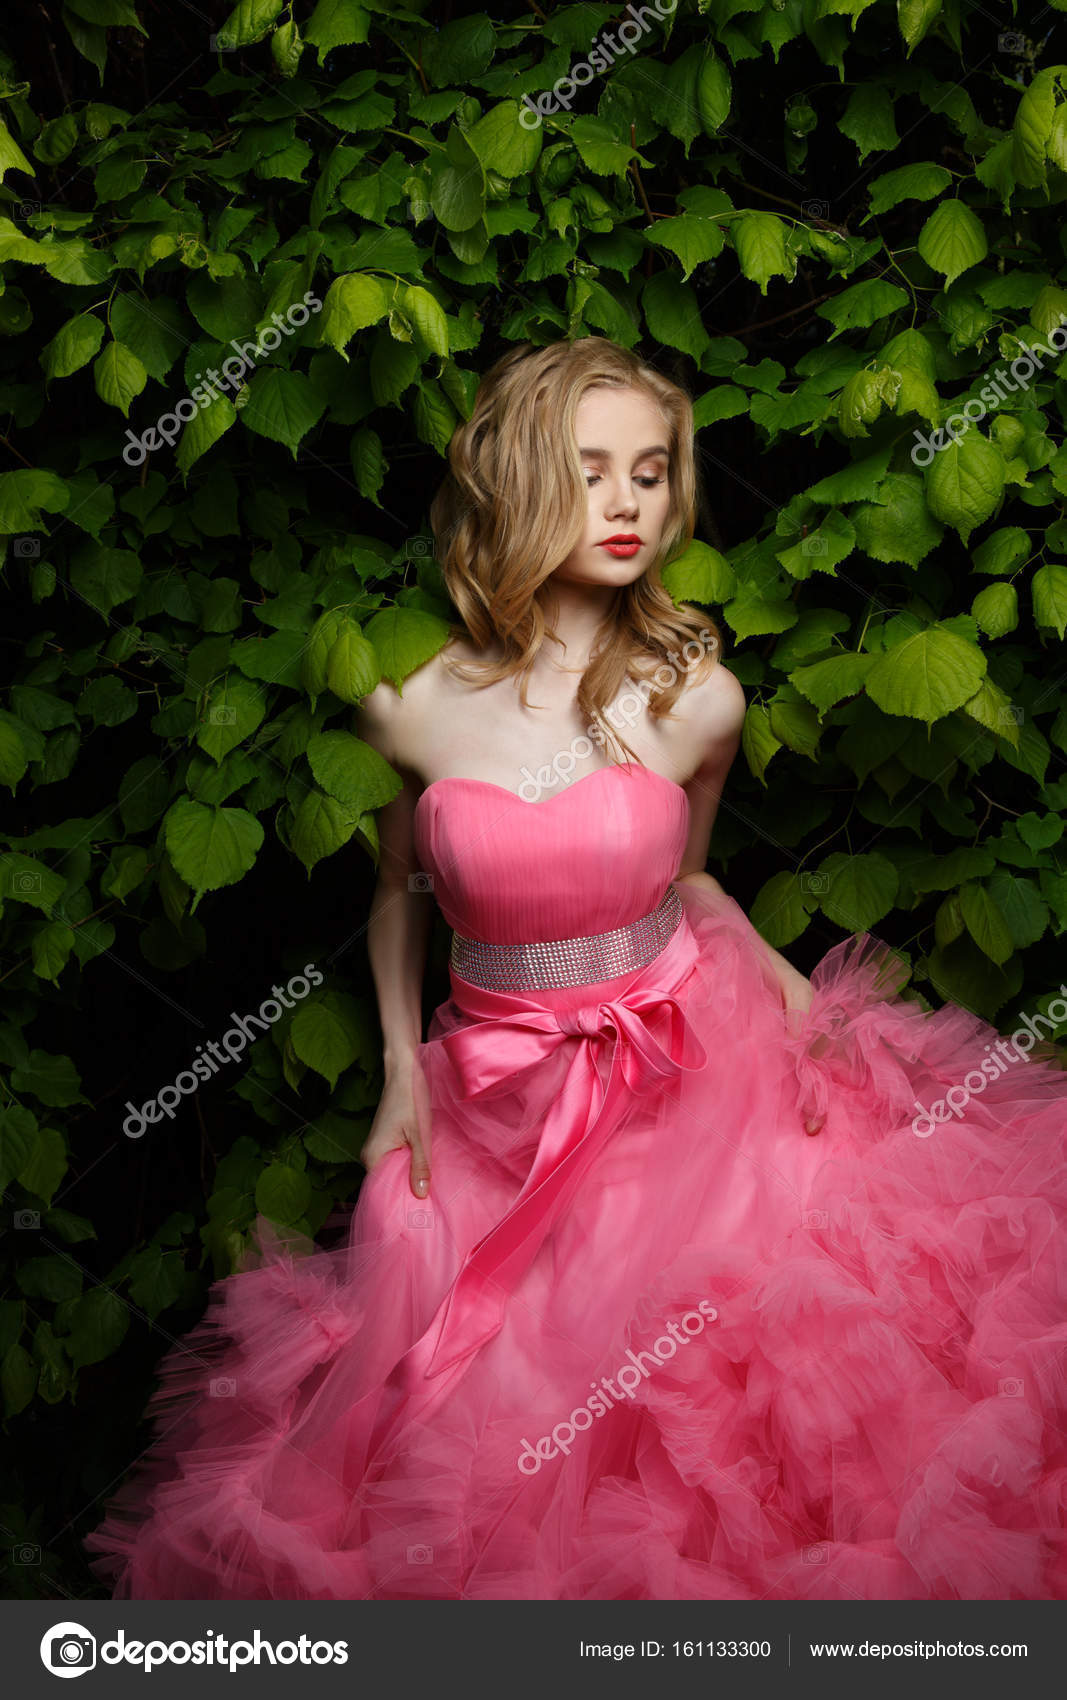 Creative Outdoor Portraits | Photography poses women, Nature photoshoot, Outdoor  photoshoot